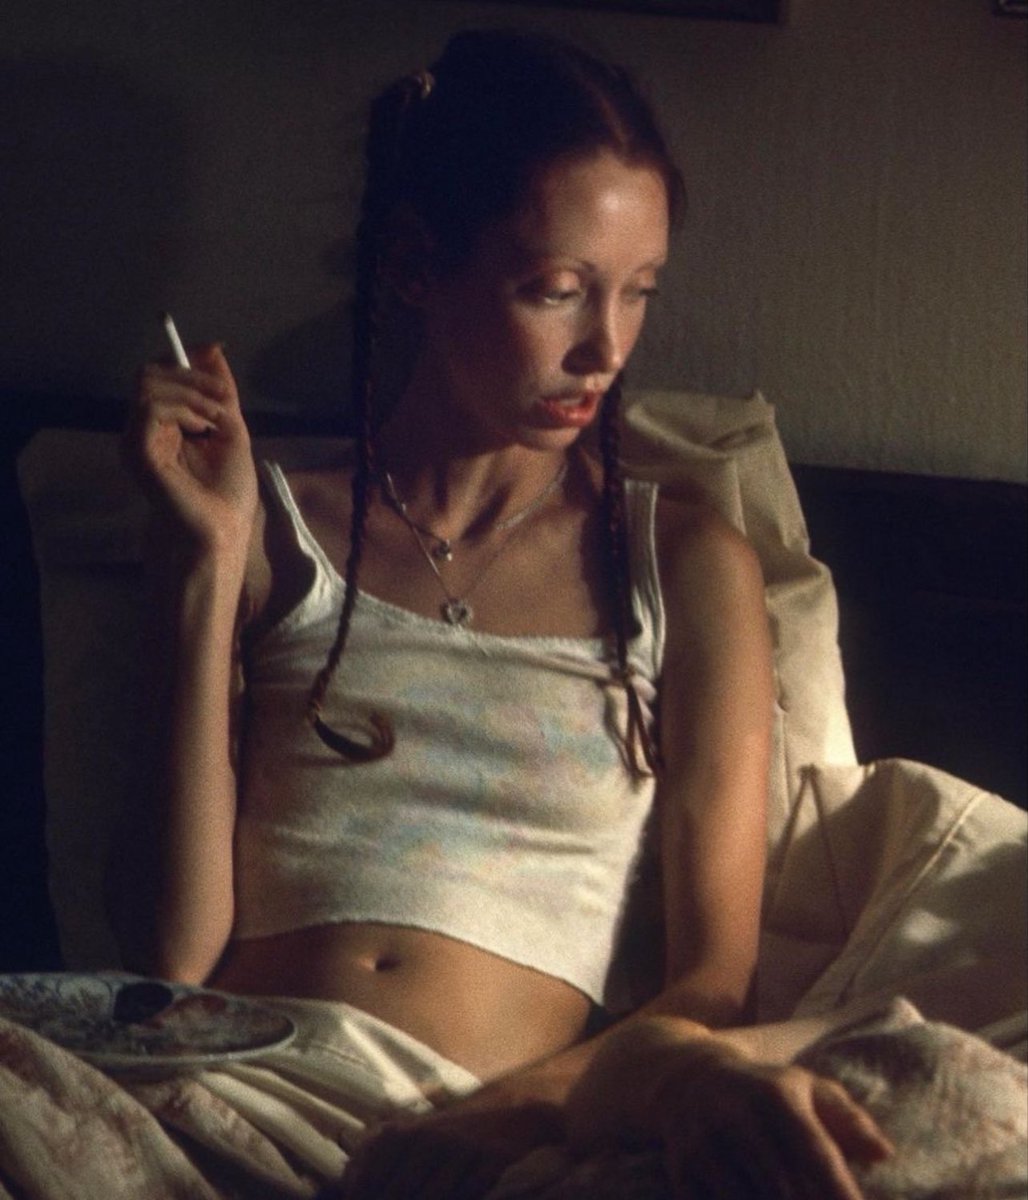 shelley duvall in annie hall, 1977